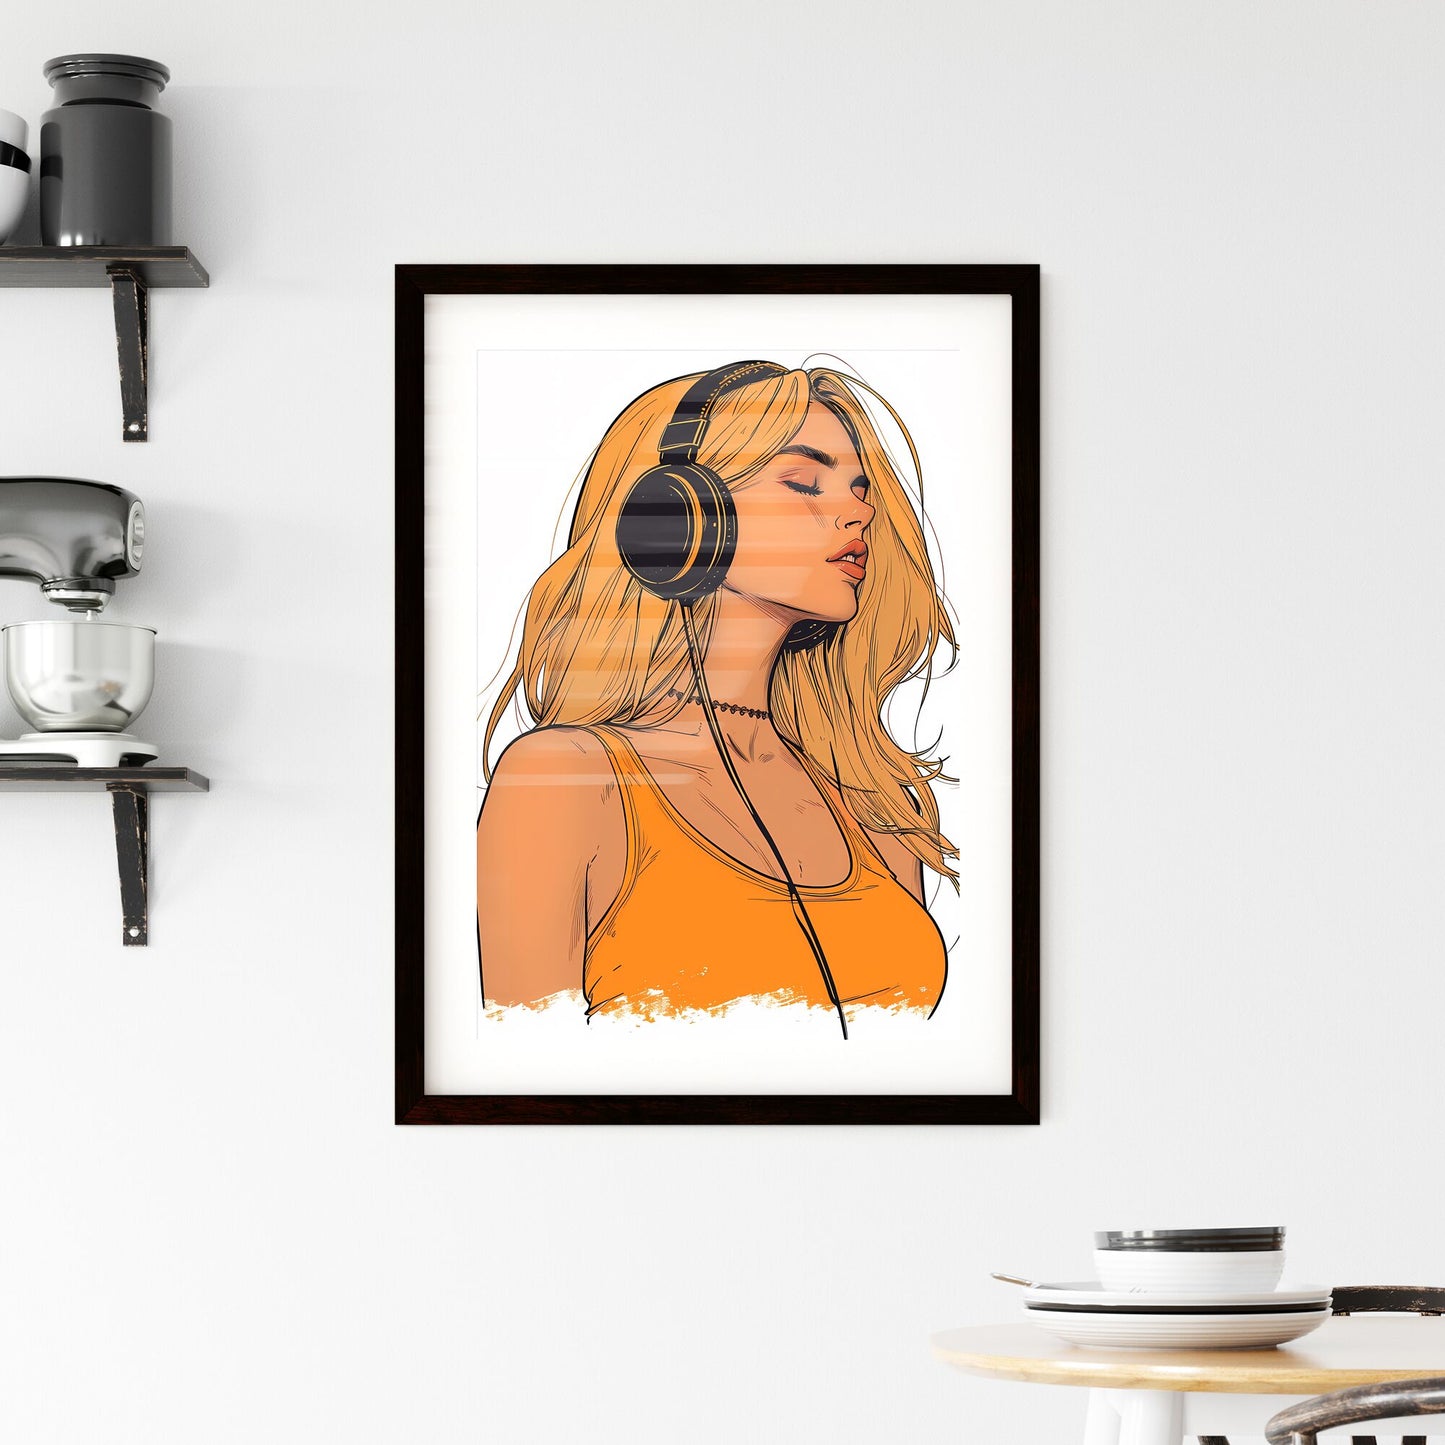 A TRENDY young person records voice - Art print of a woman wearing headphones Default Title